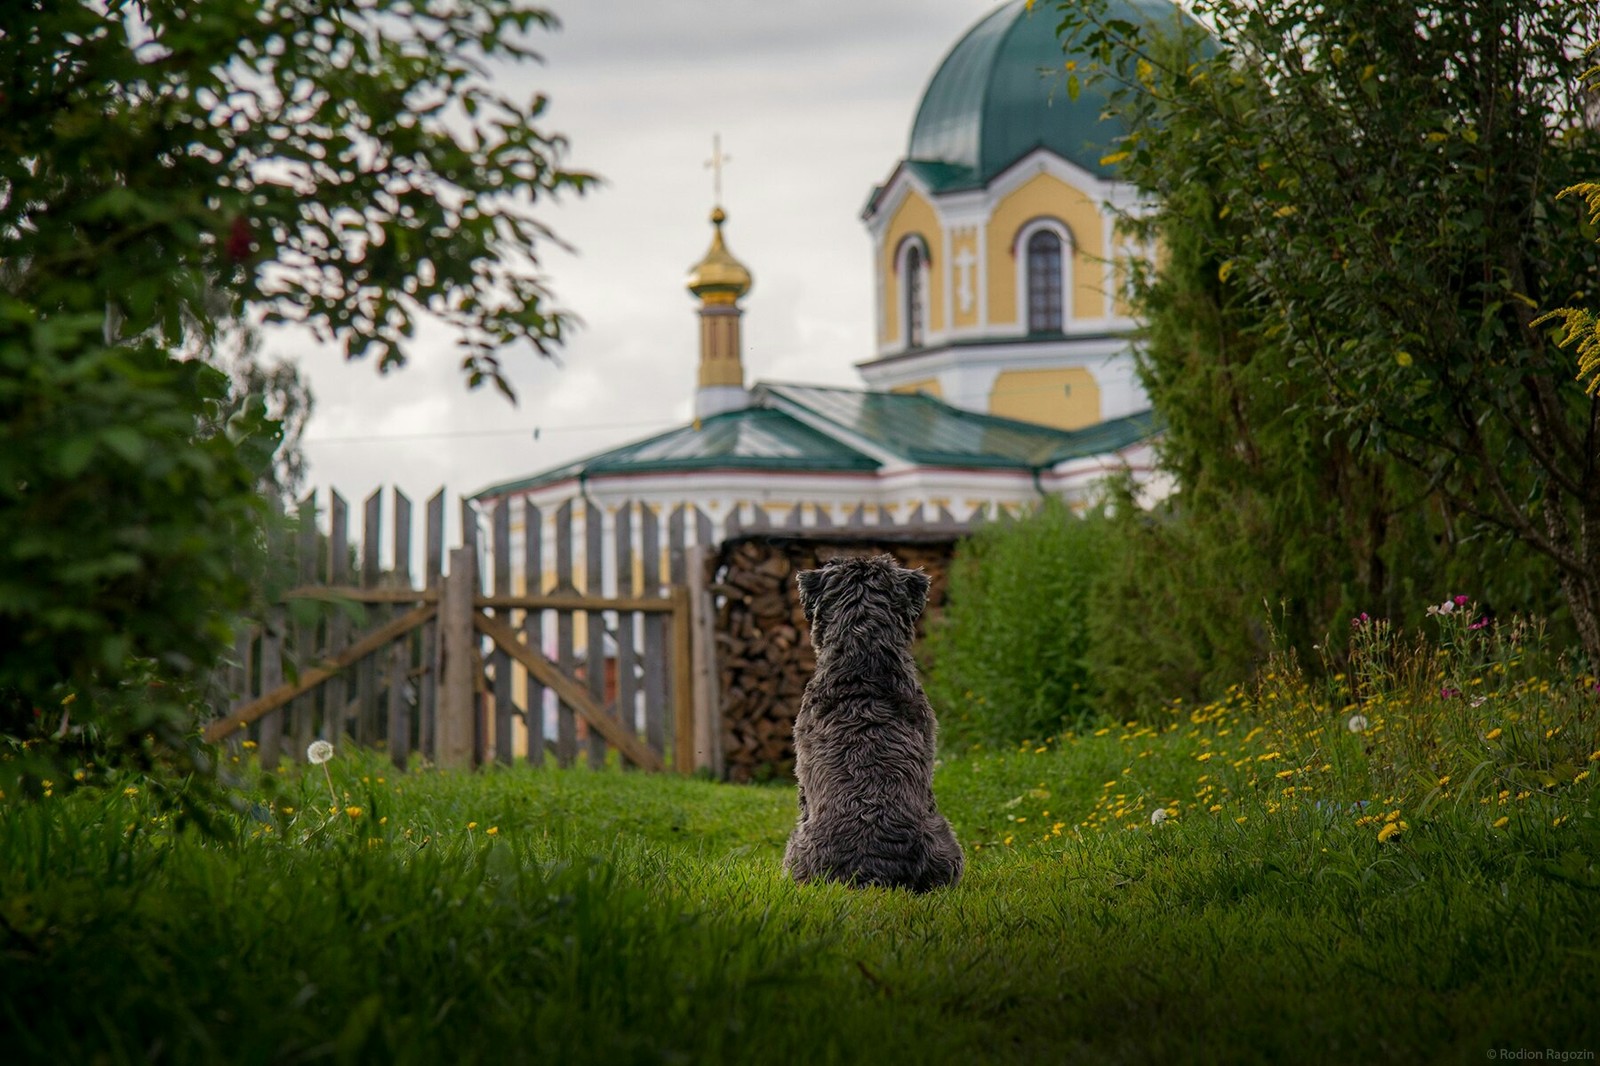 True friend - Reportage, Ural, Village, Dog, The national geographic, Nature, Russia, Perm Territory, My